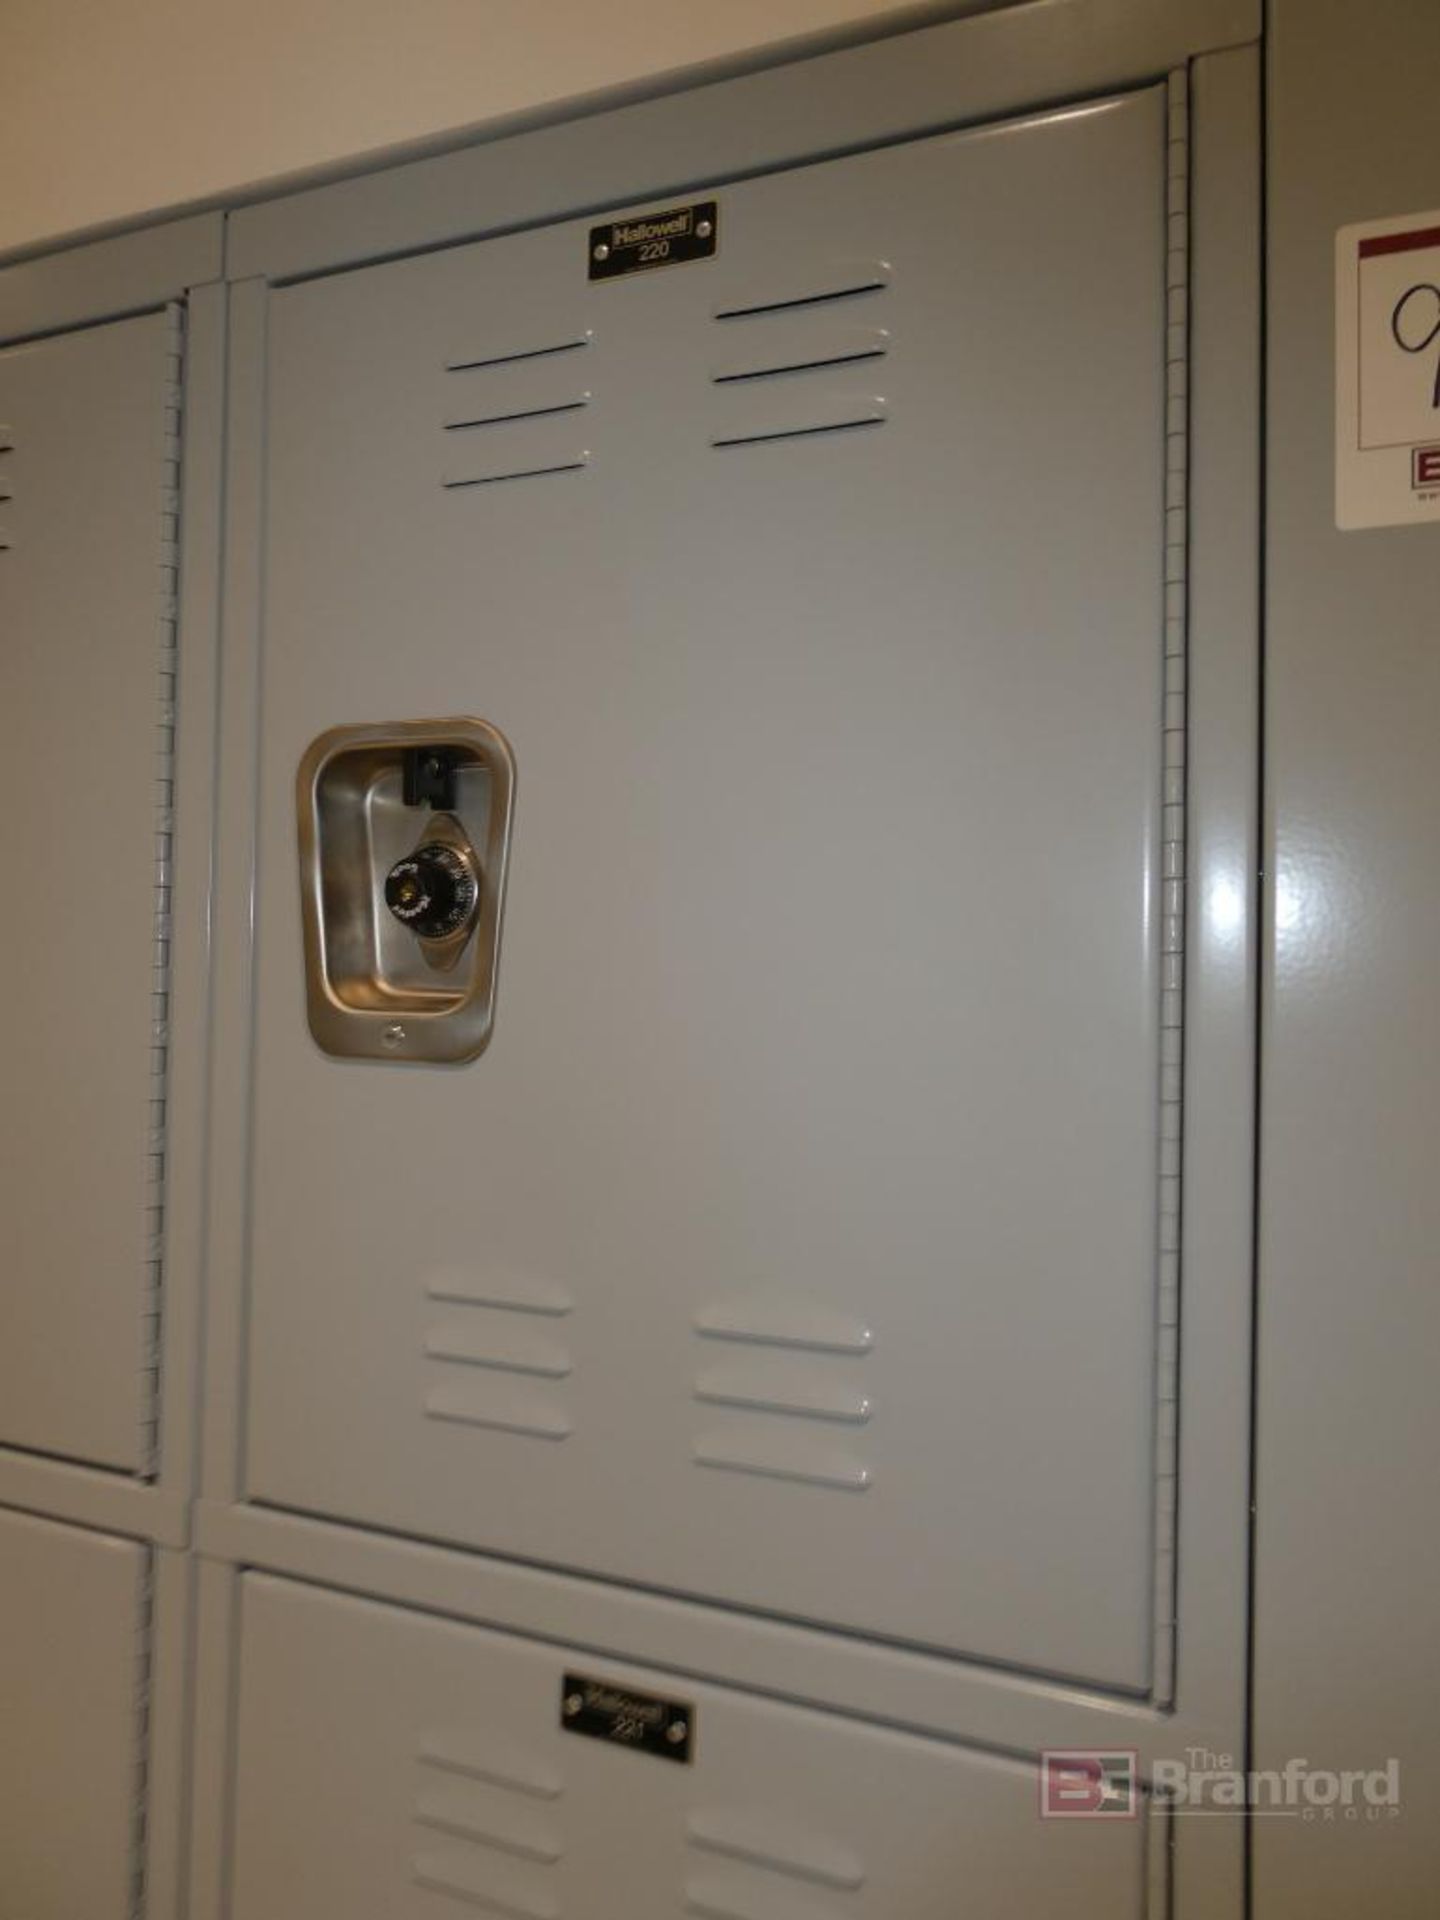 (612) Hallowell Lockers w/ Built-In Combination Lock - Image 2 of 6